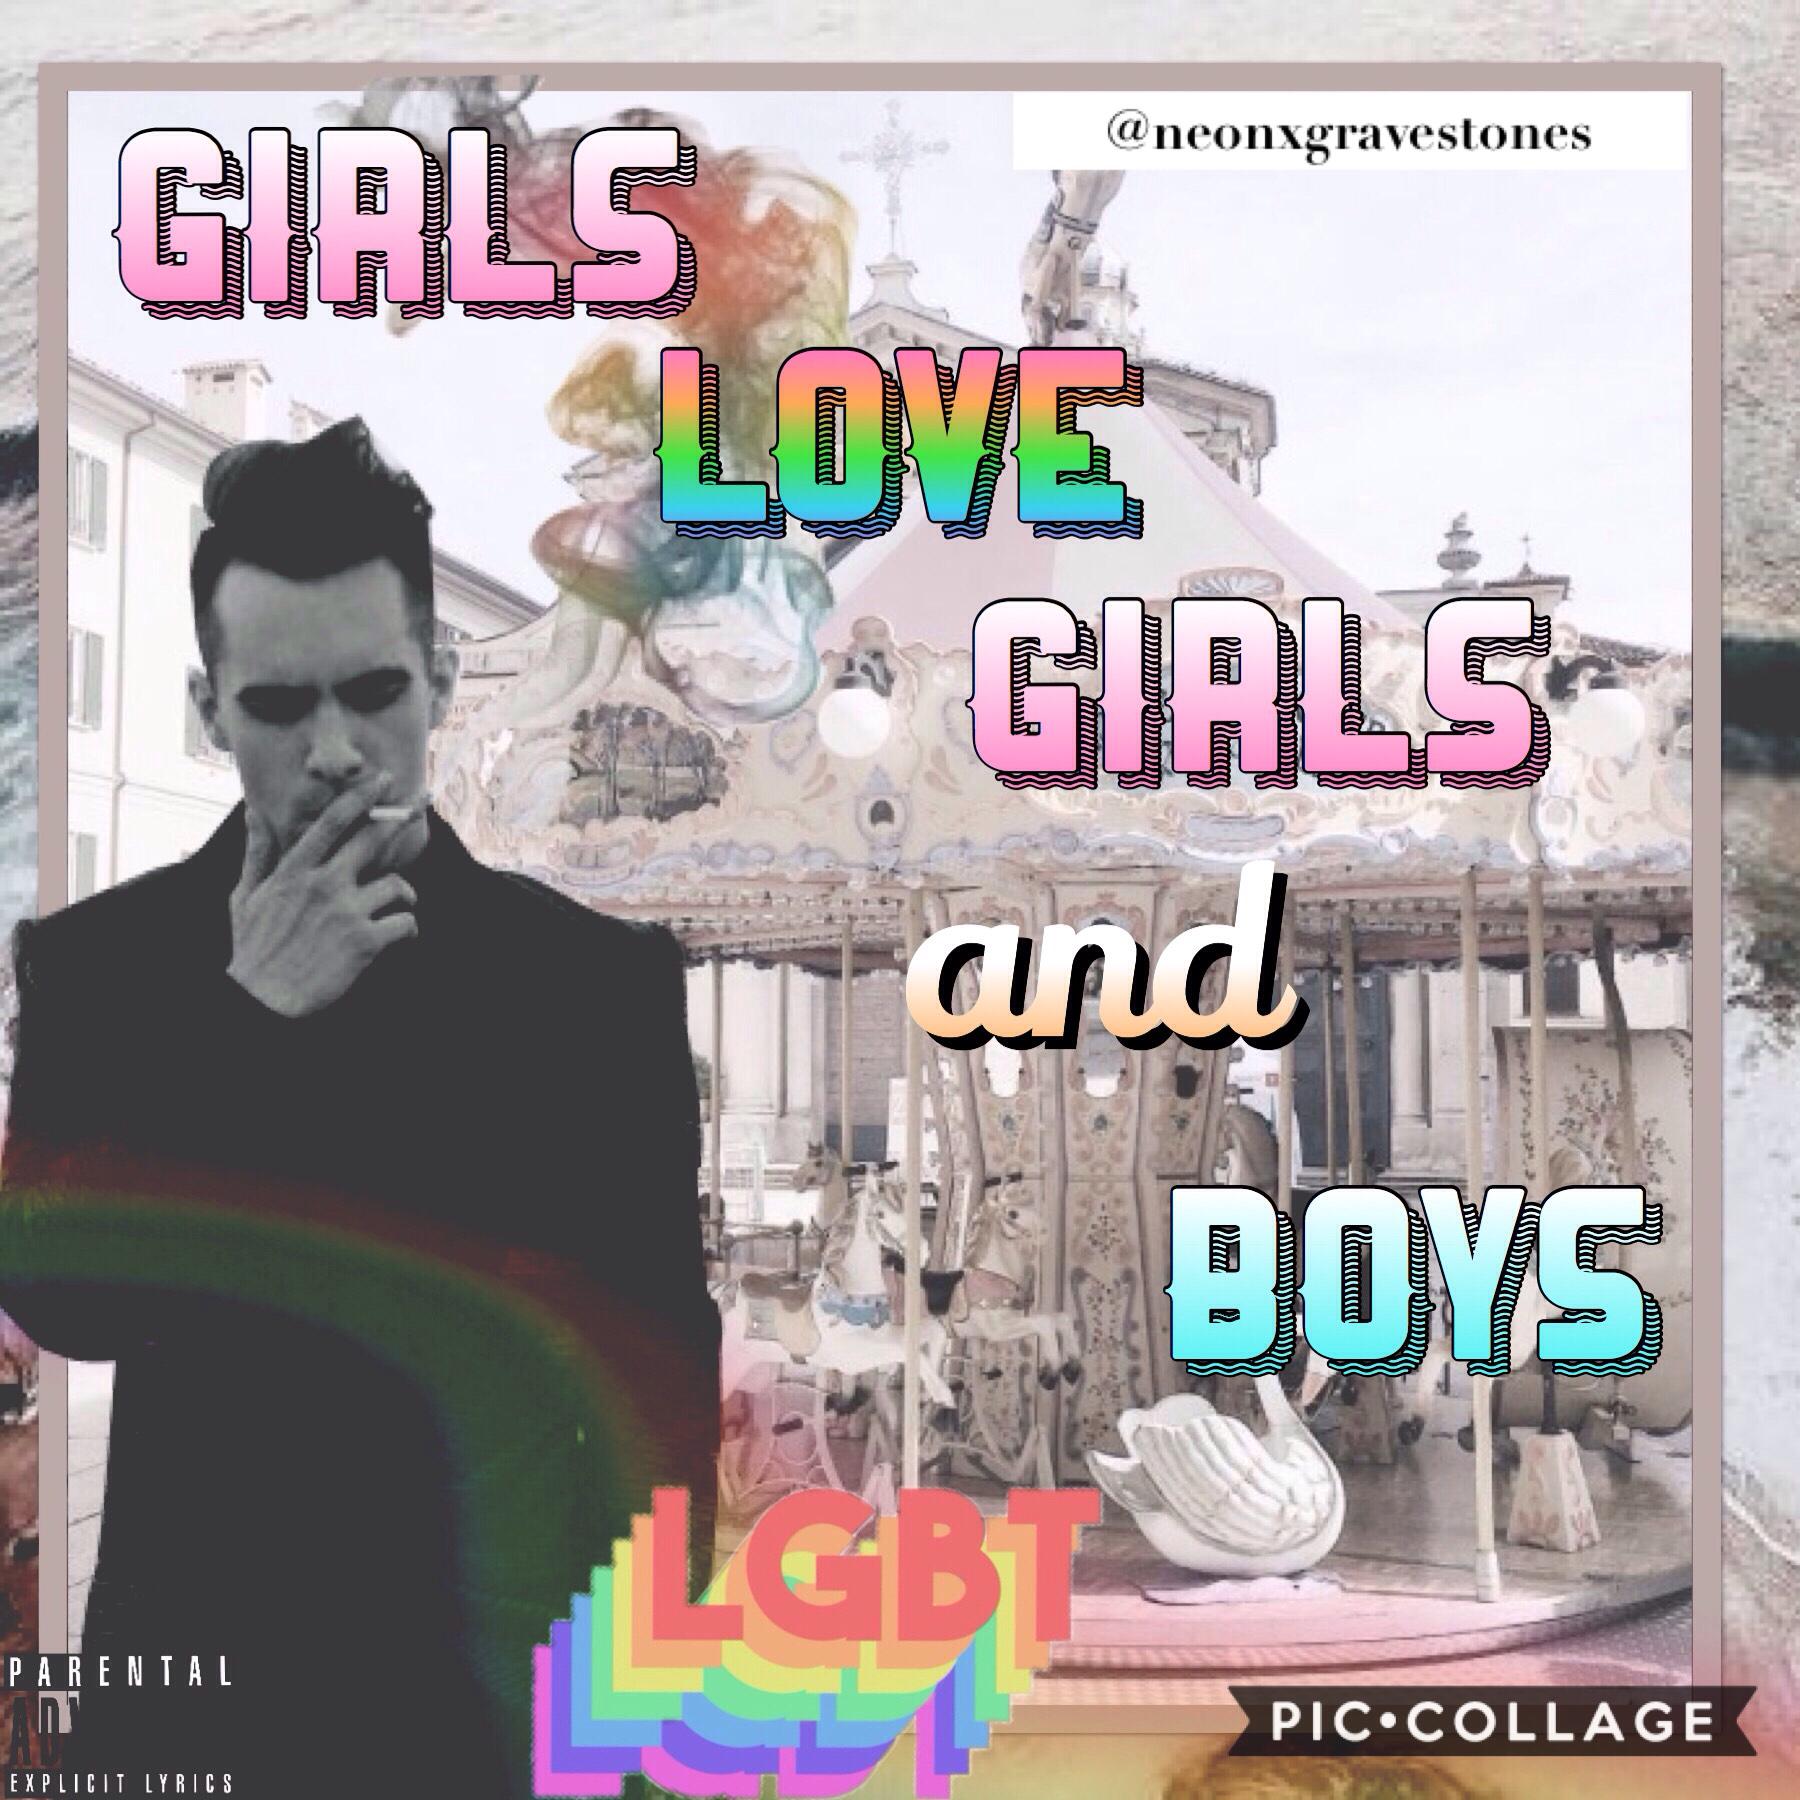 🌈Girls/Girls/Boys: Panic! At The Disco🌈 Happy Pride month!